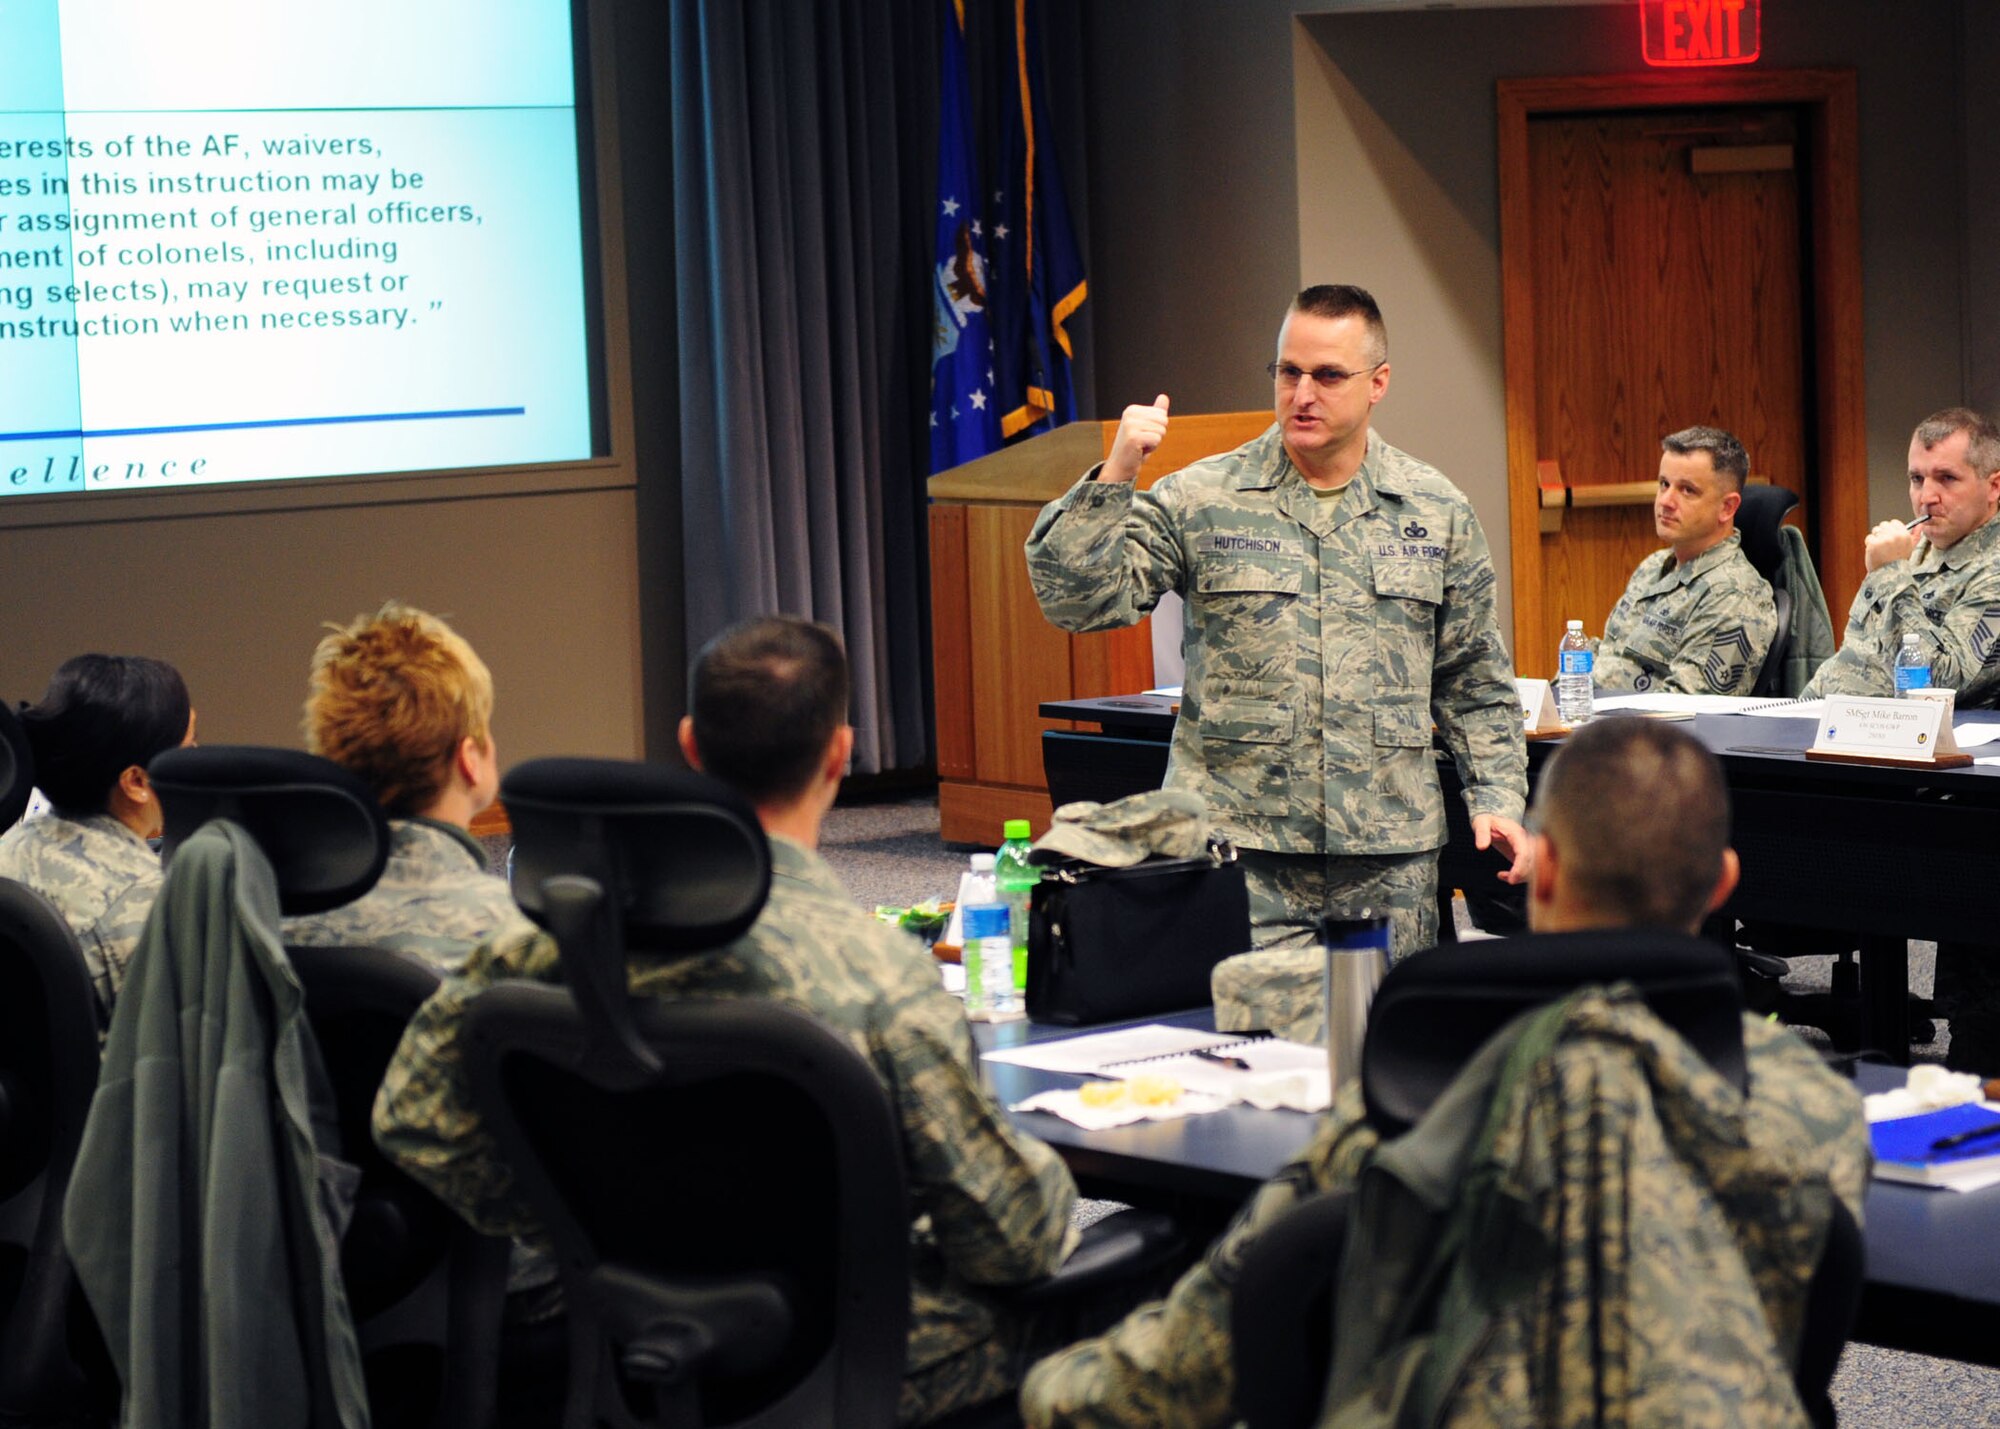 Chief Master Sgt. Buddy Hutchison of the Air Force Chiefs' Group presents at the 2014 AFMC Chiefs' Orientation. (U.S. Air Force photo/Senior Airman James Jacobs)